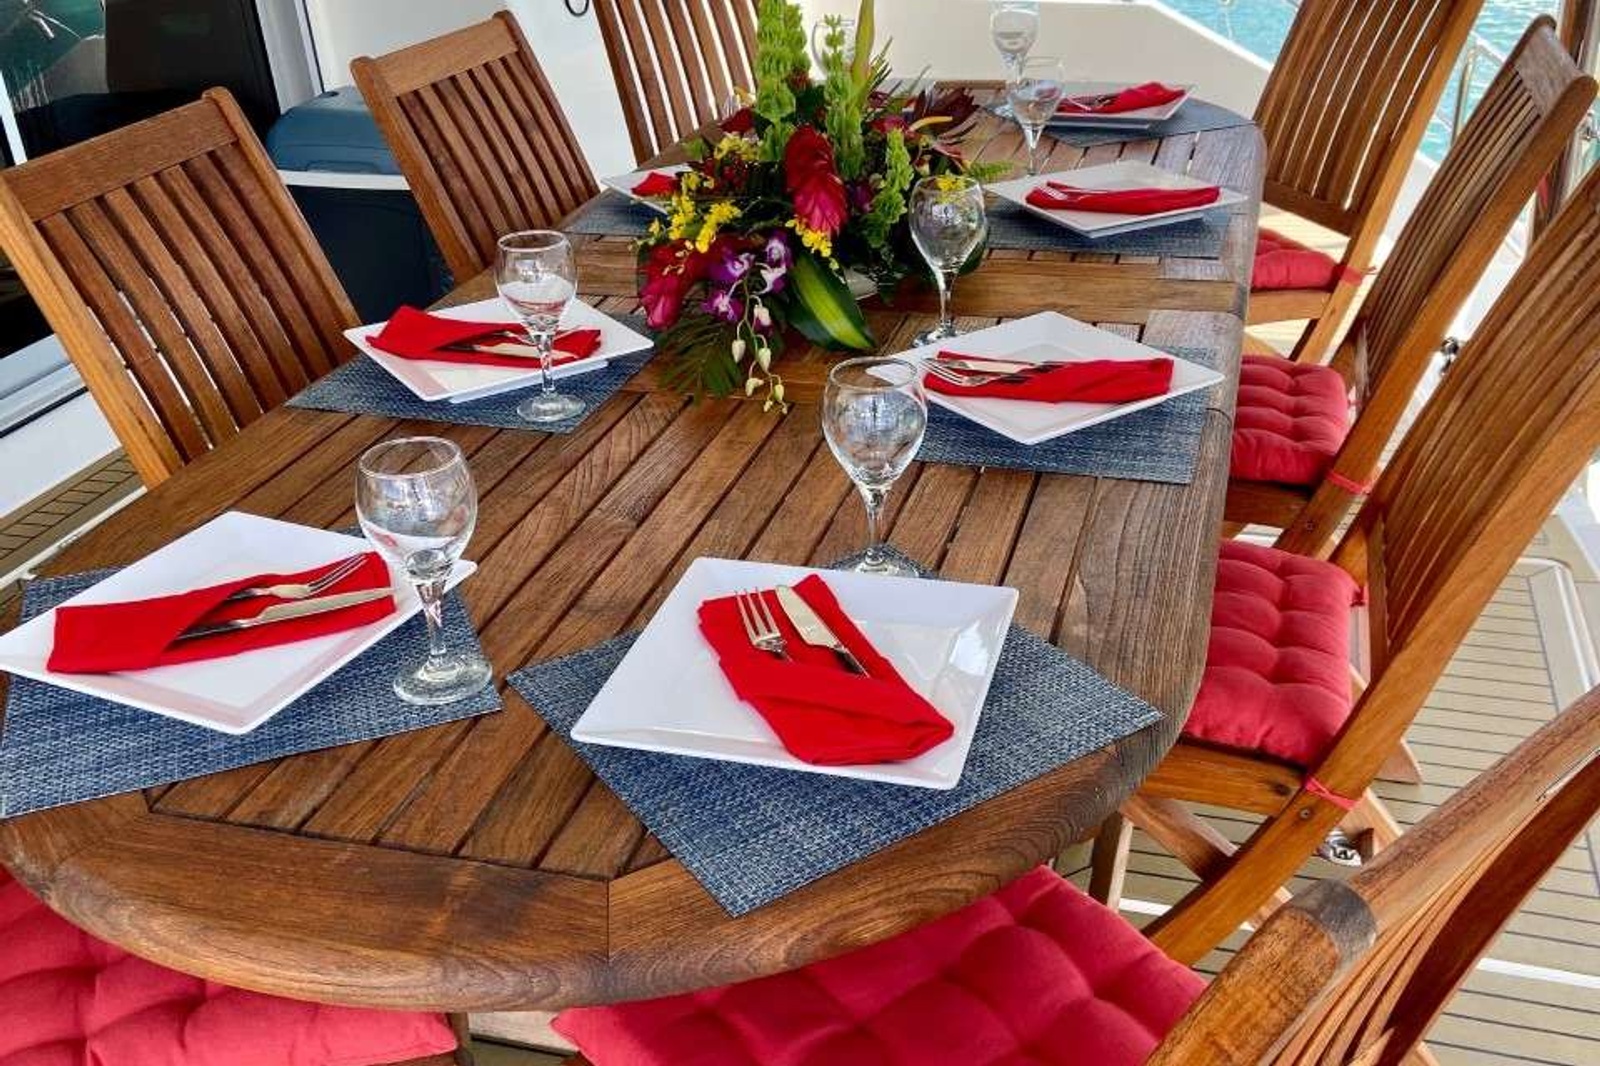 Alfresco dining for up to 10 on the open aft deck.